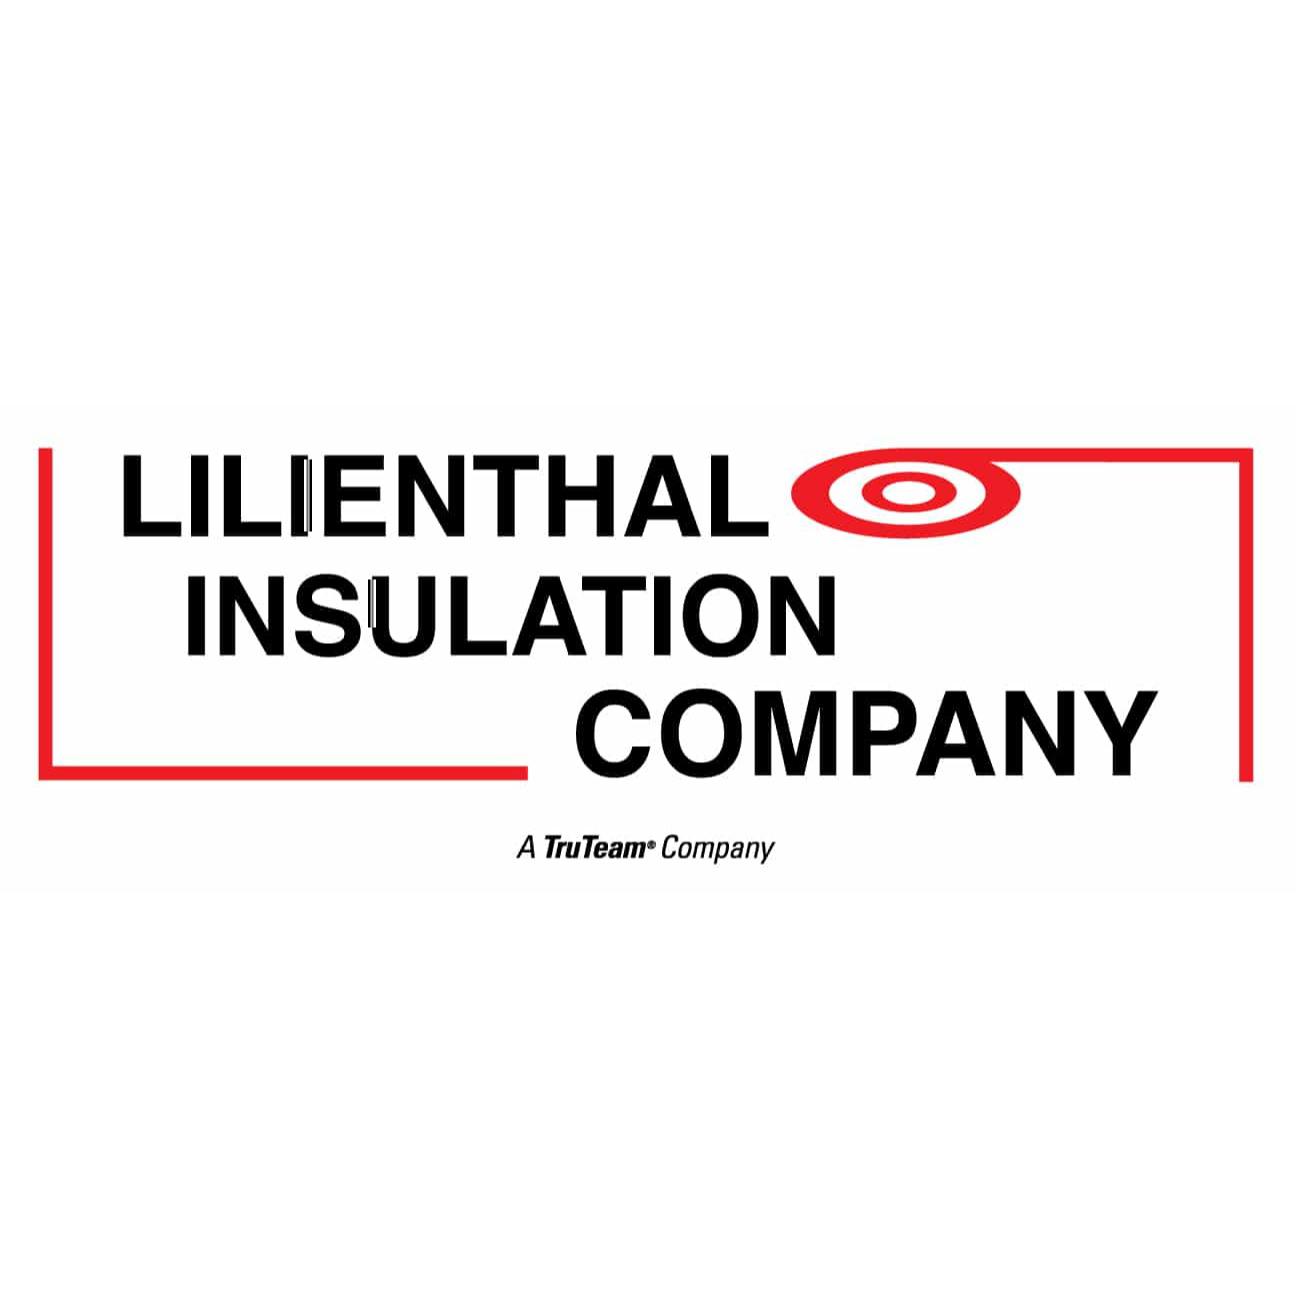 Lilienthal Insulation